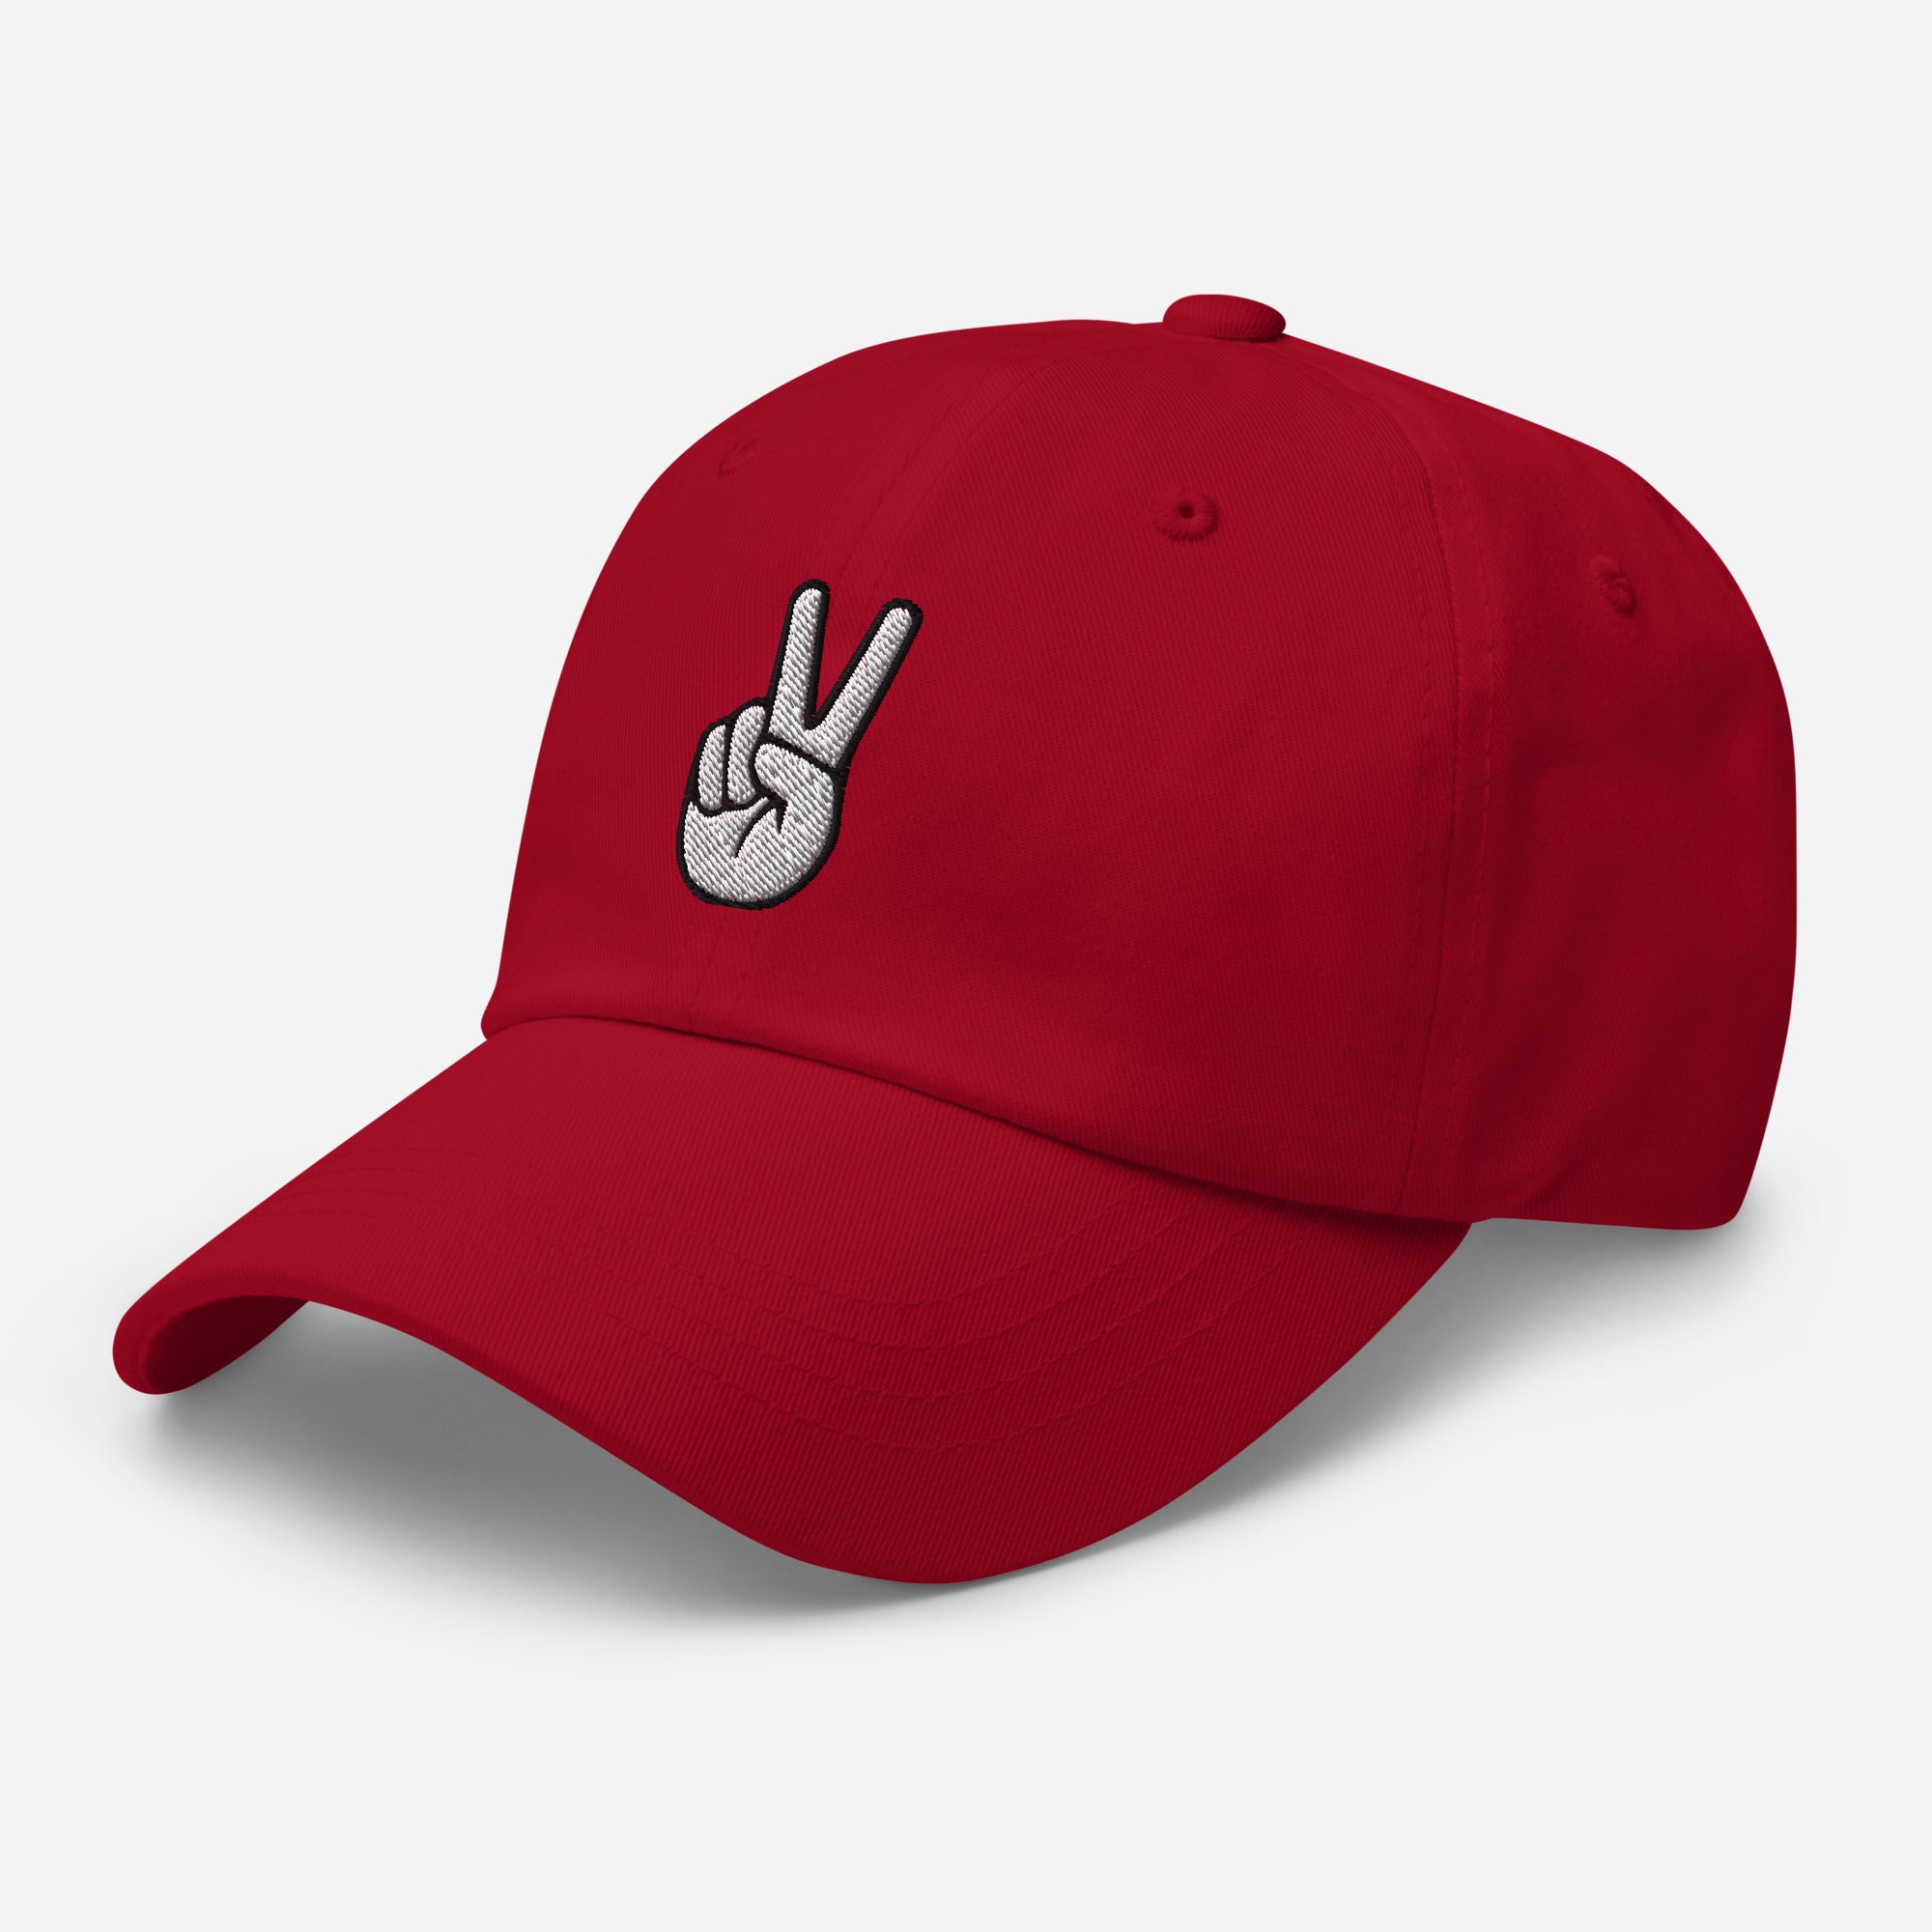 The V Sign for Victory Hand Gesture Embroidered Baseball Cap Dad Hat